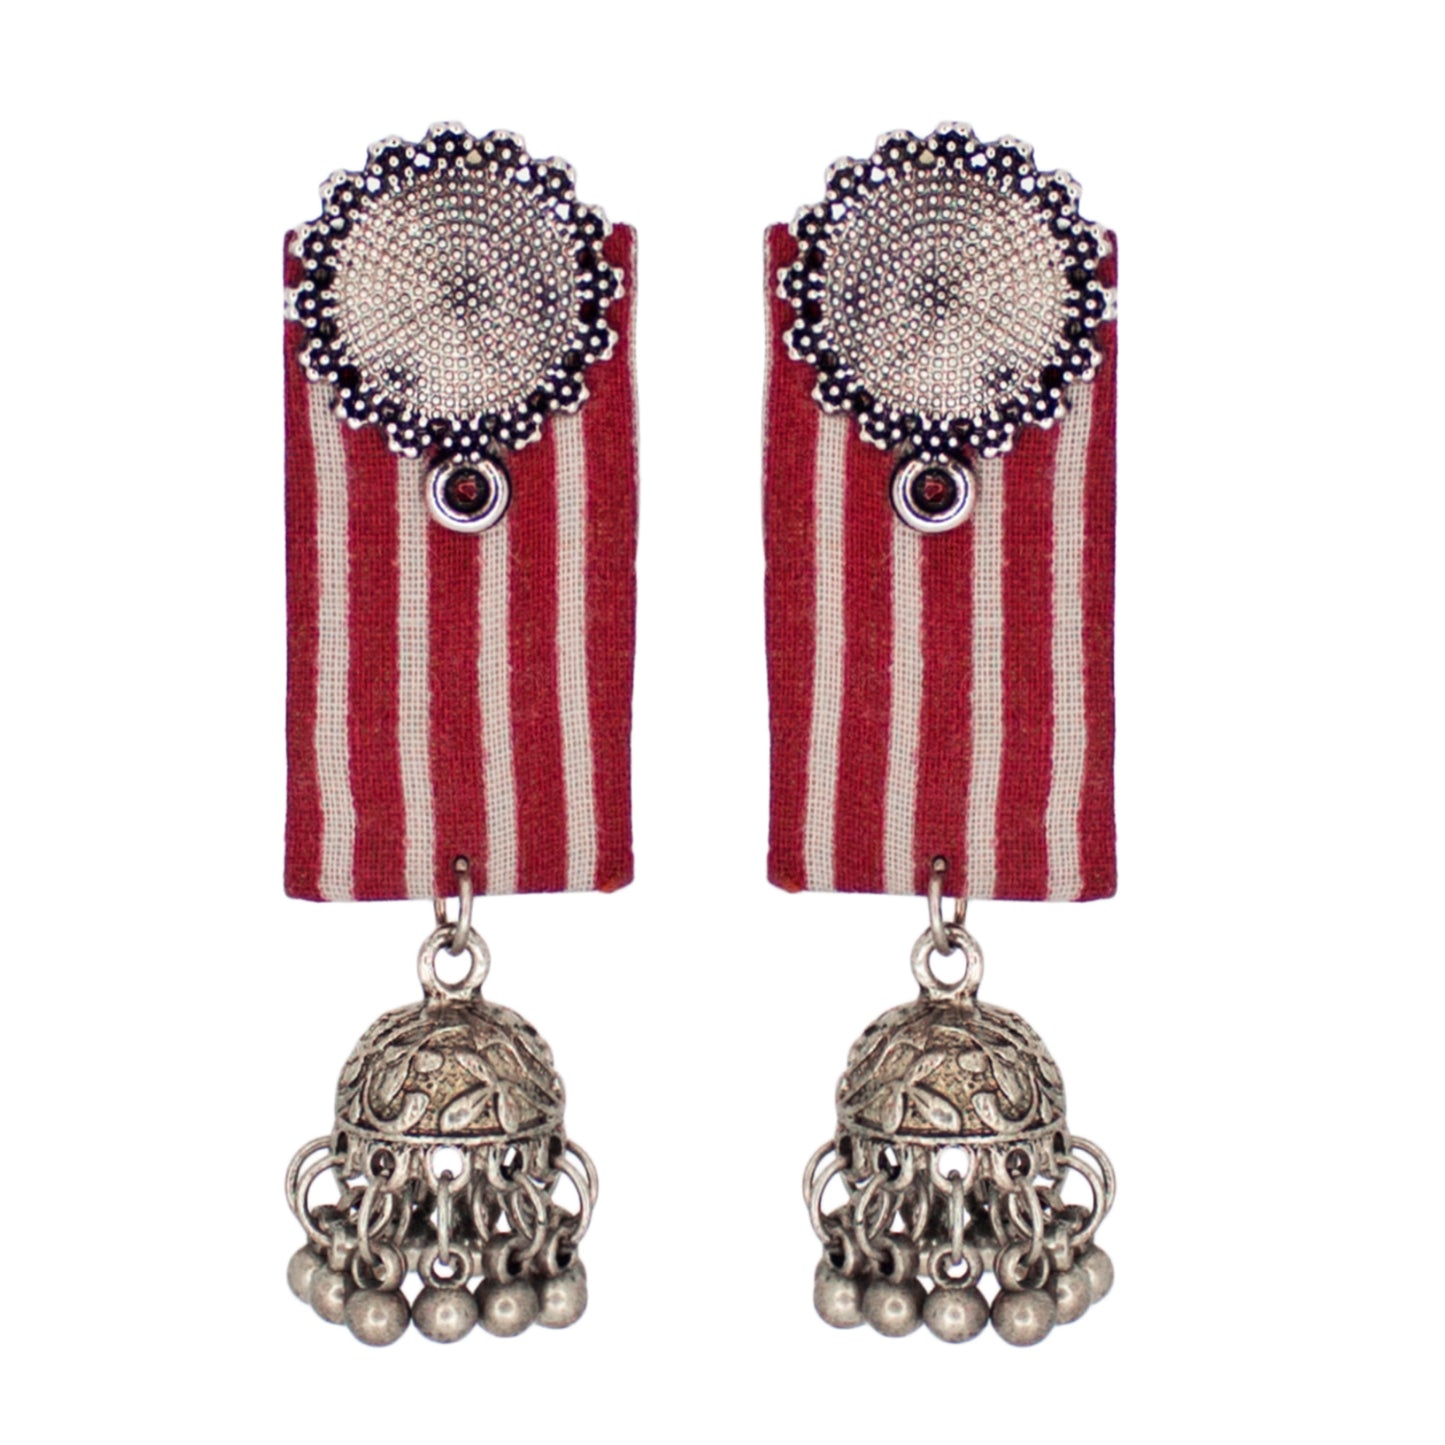 Organic Vibes Handmade Red And White Striped With Floral Stud And Jhumki Fabric Earrings For Women